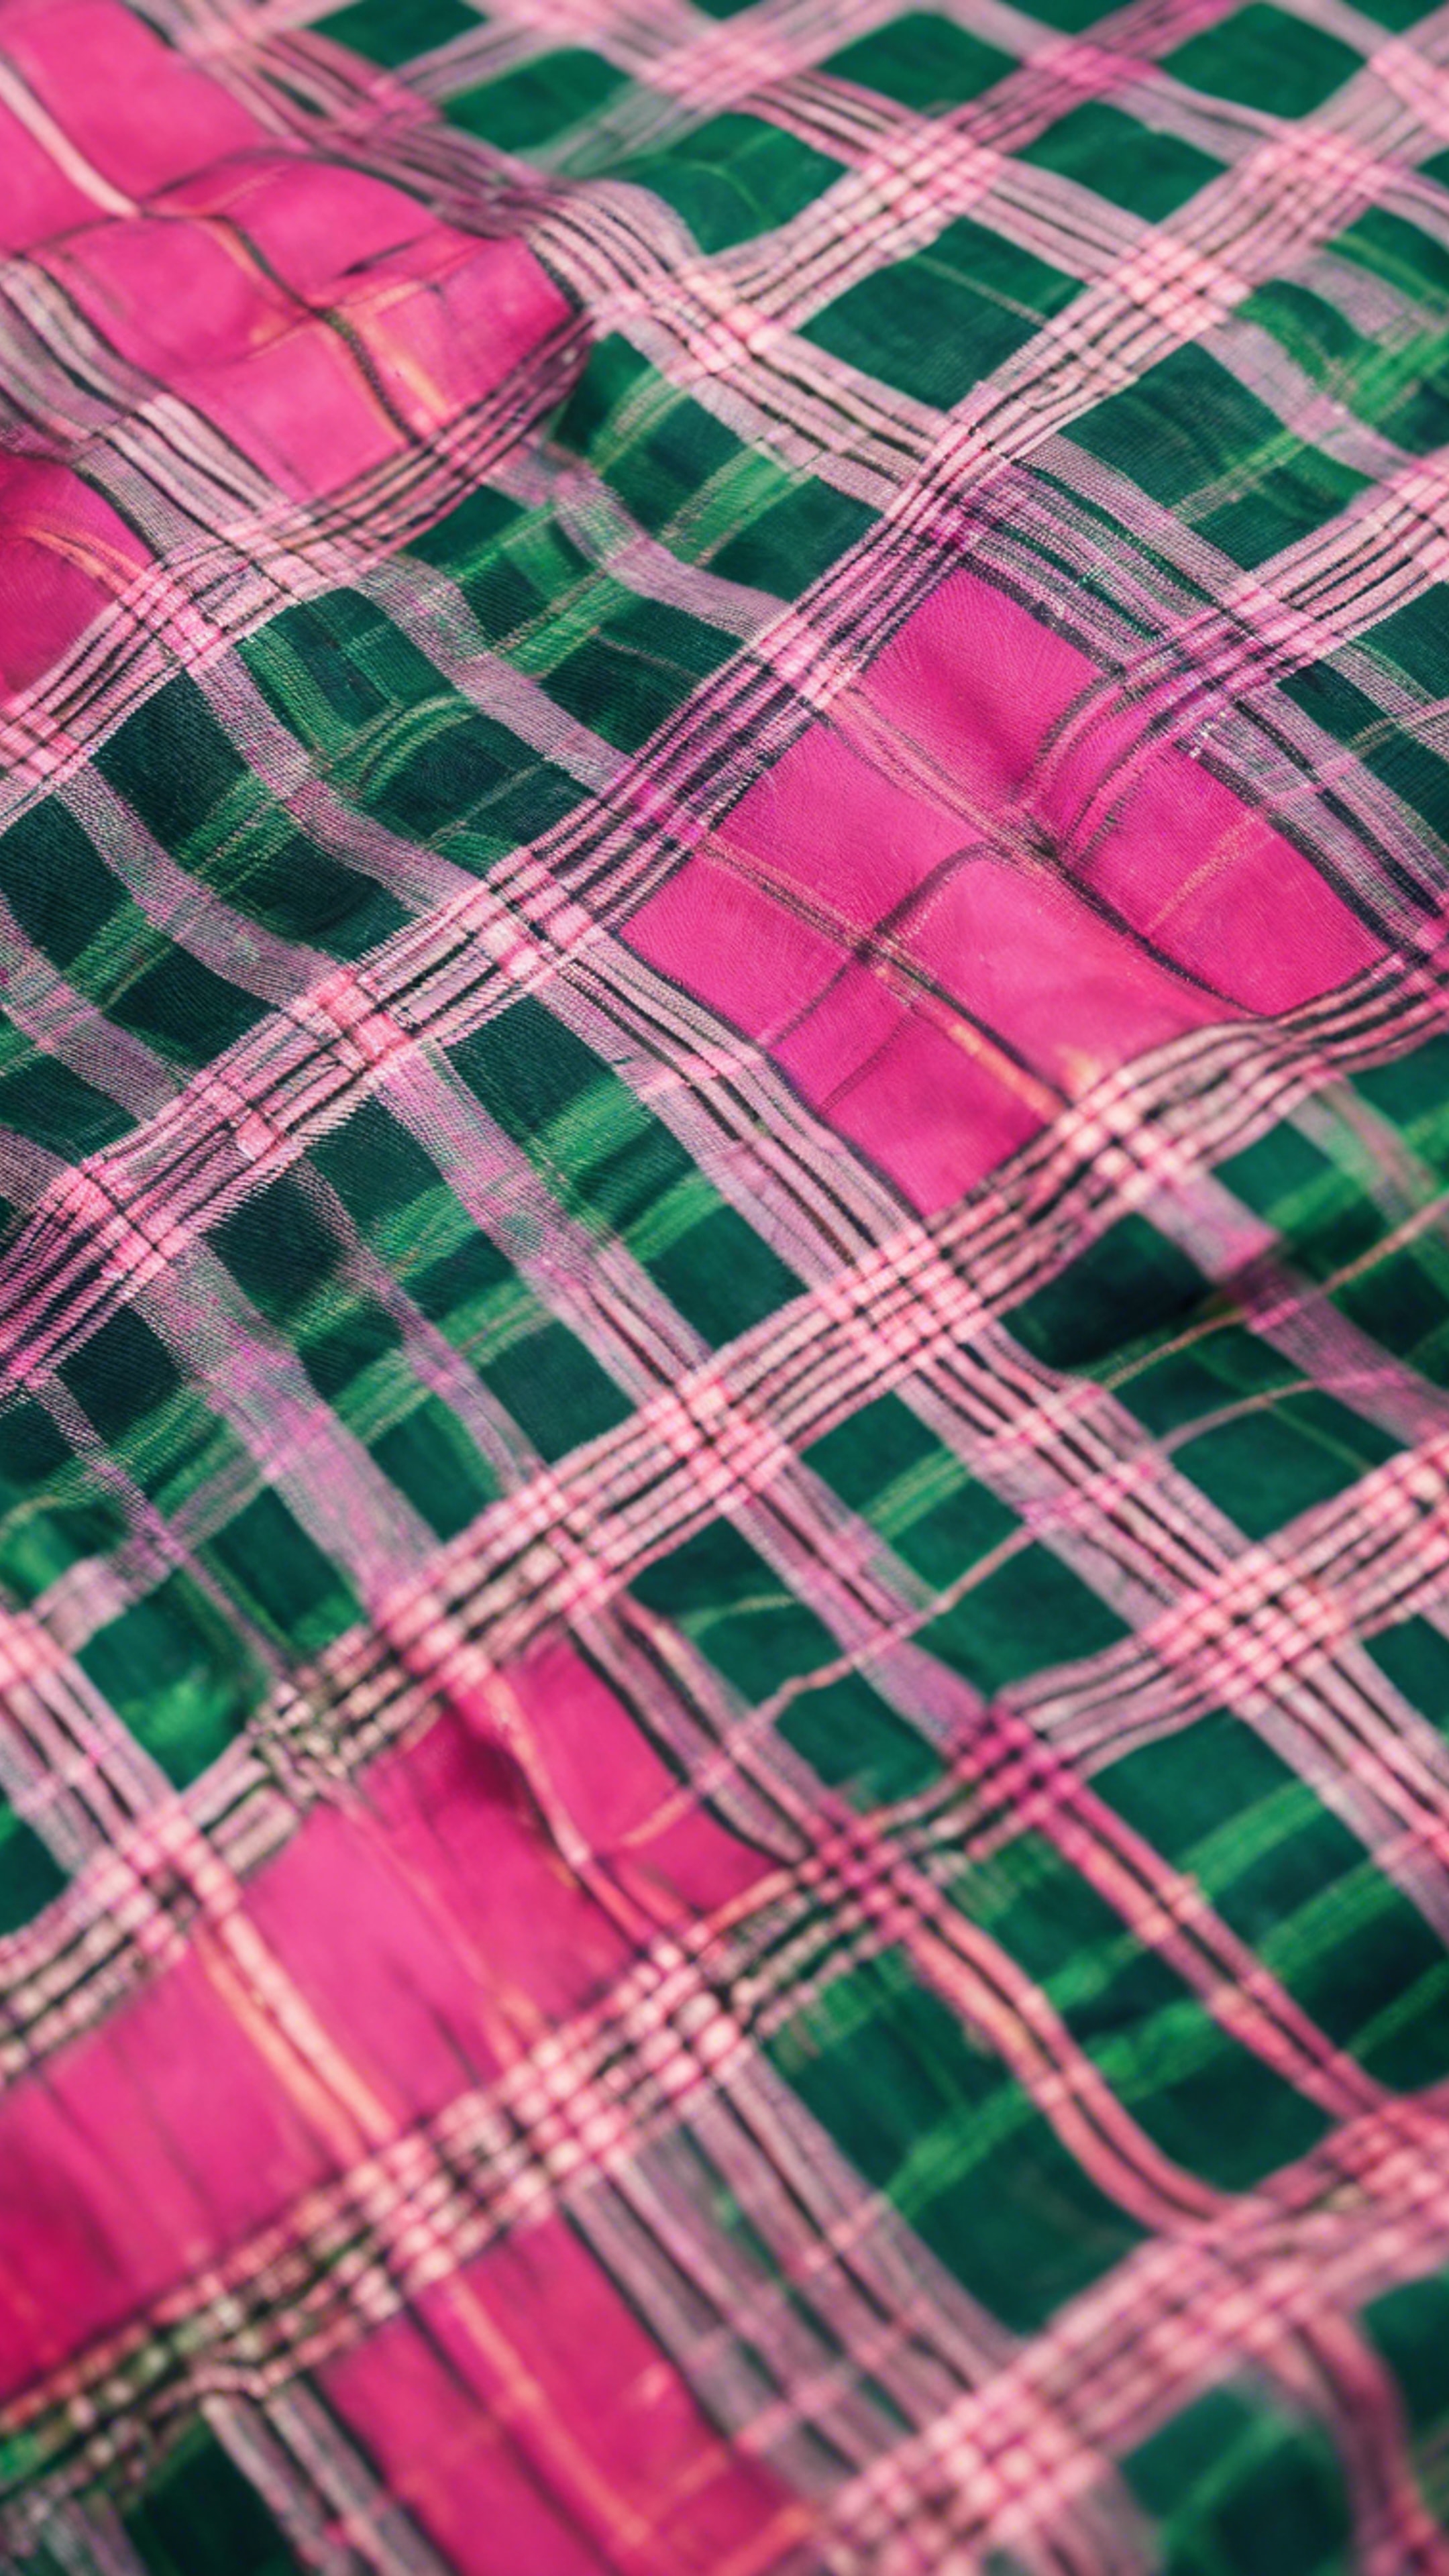 A vibrant green and pink tartan pattern covering a preppy summer coat. Tapeta[87107d8556aa4441ace0]